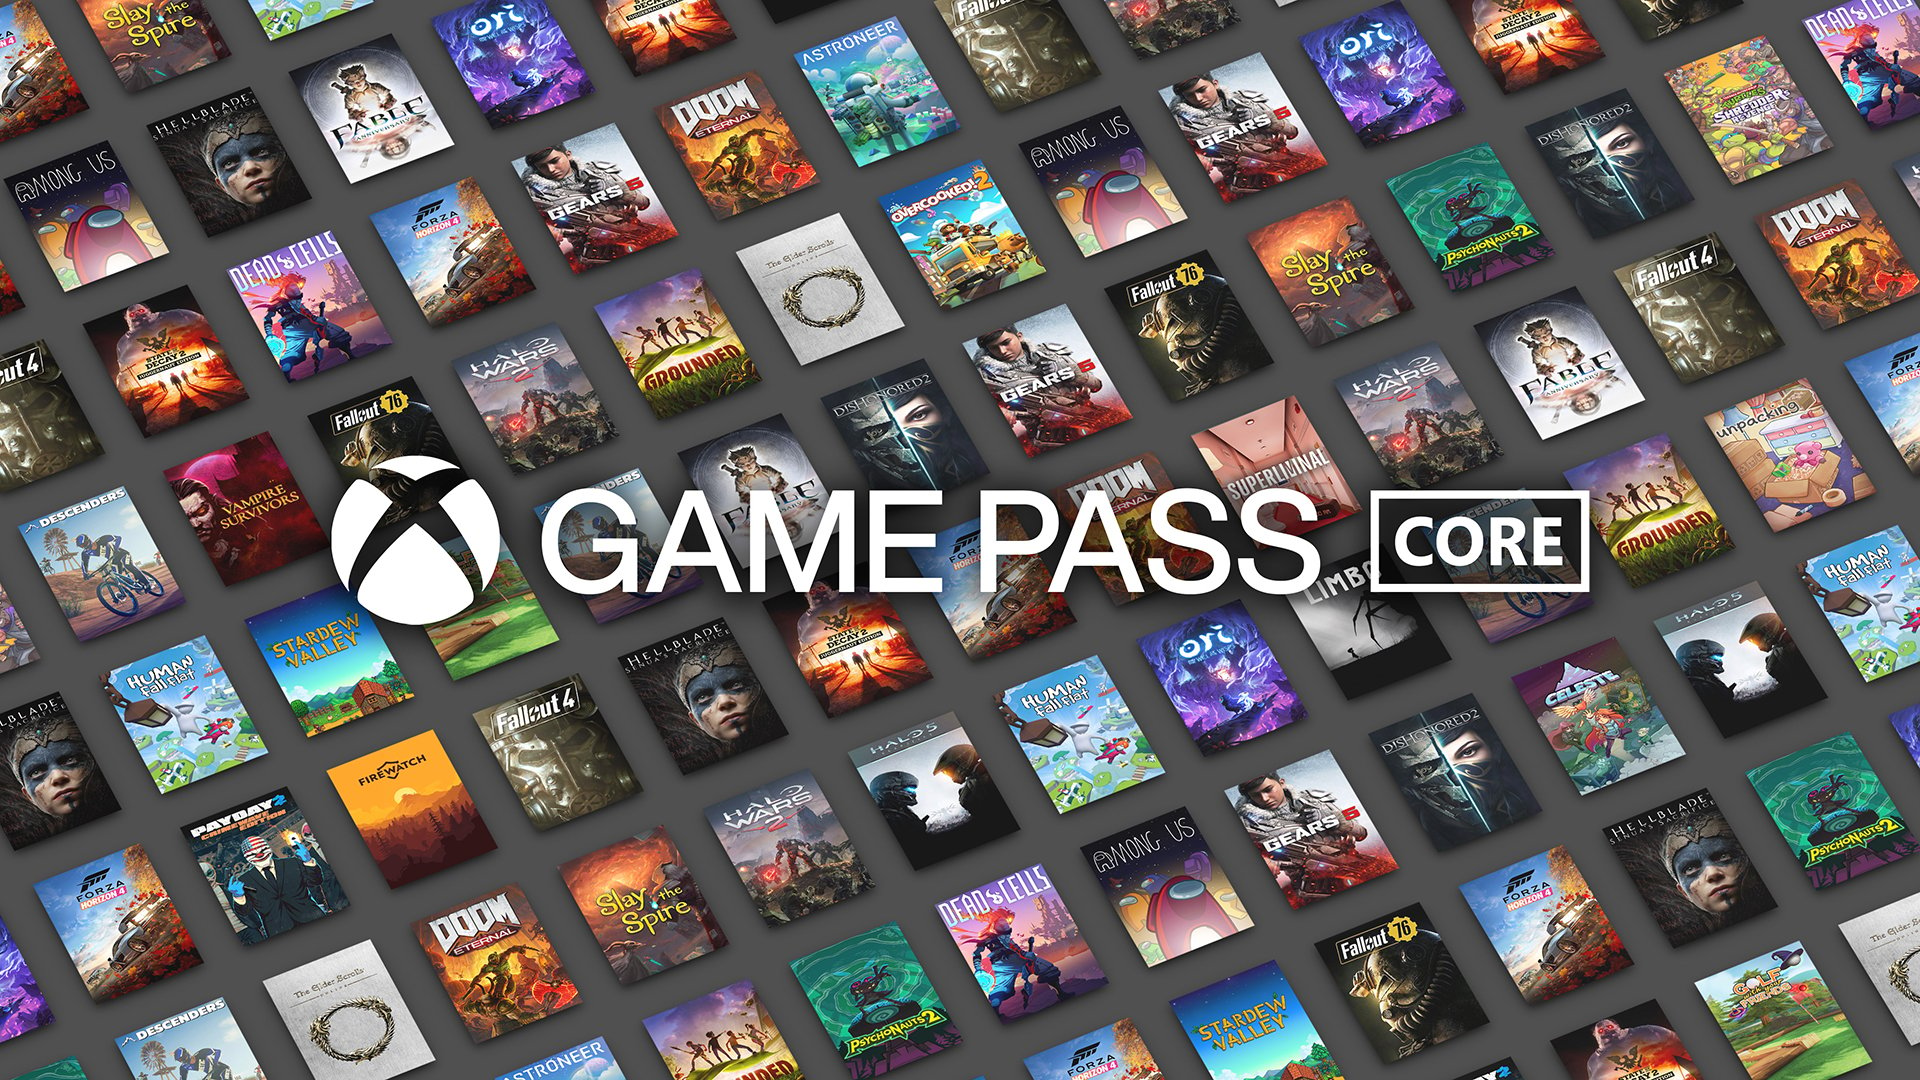 Xbox Game Pass Adds Forza Motorsport, Gotham Knights, and More in Early  October